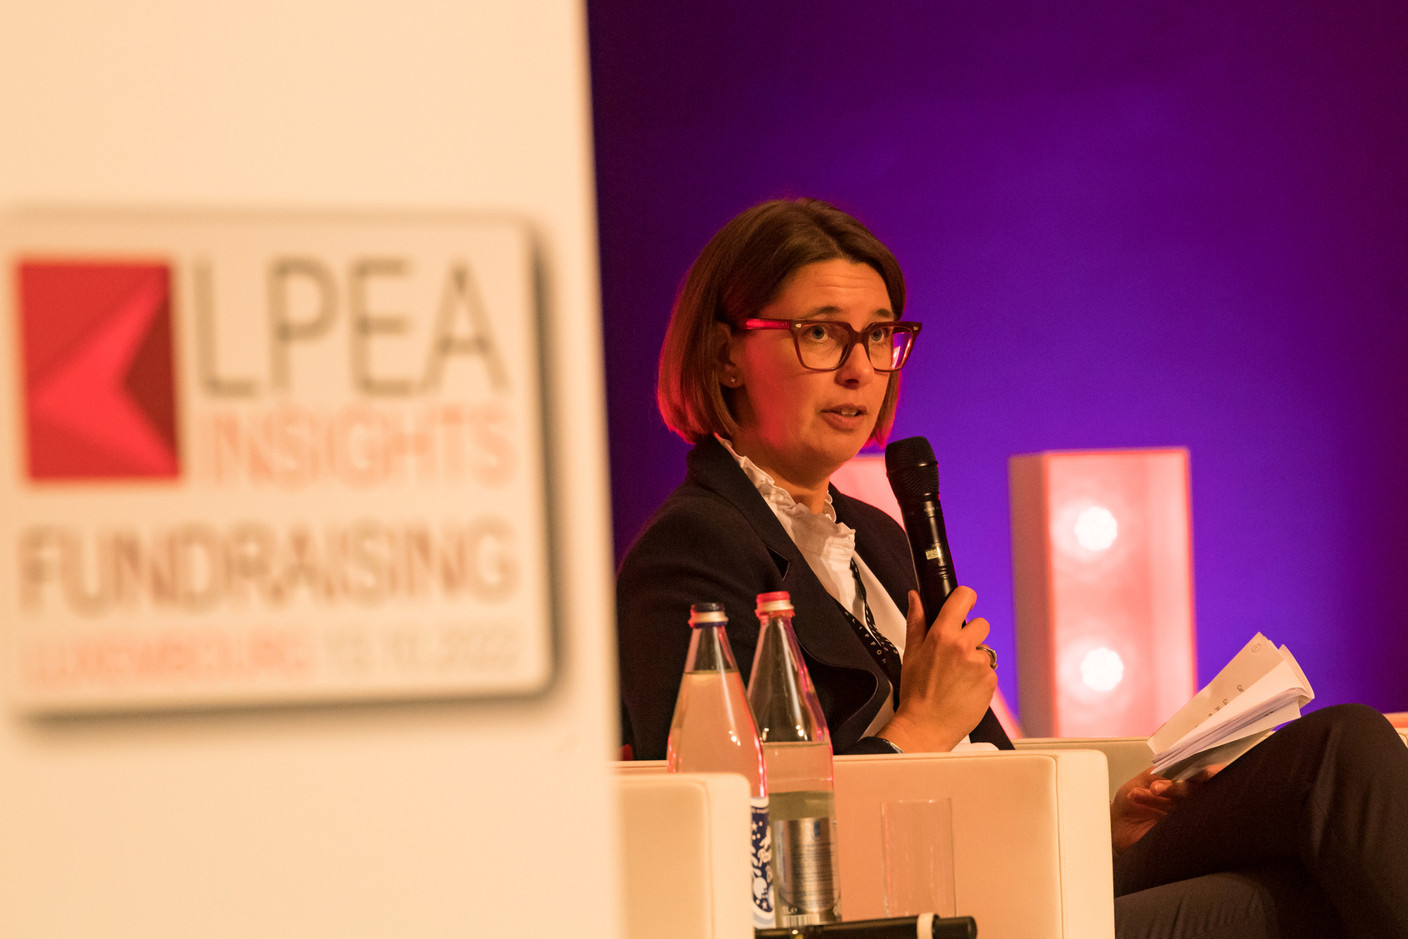 Caroline Kragerud of Cube Infrastructure Managers is seen speaking on the “Fundraising from Luxembourg” panel at LPEA Insights 2022, 13 October 2022. Photo: Nader Ghavami